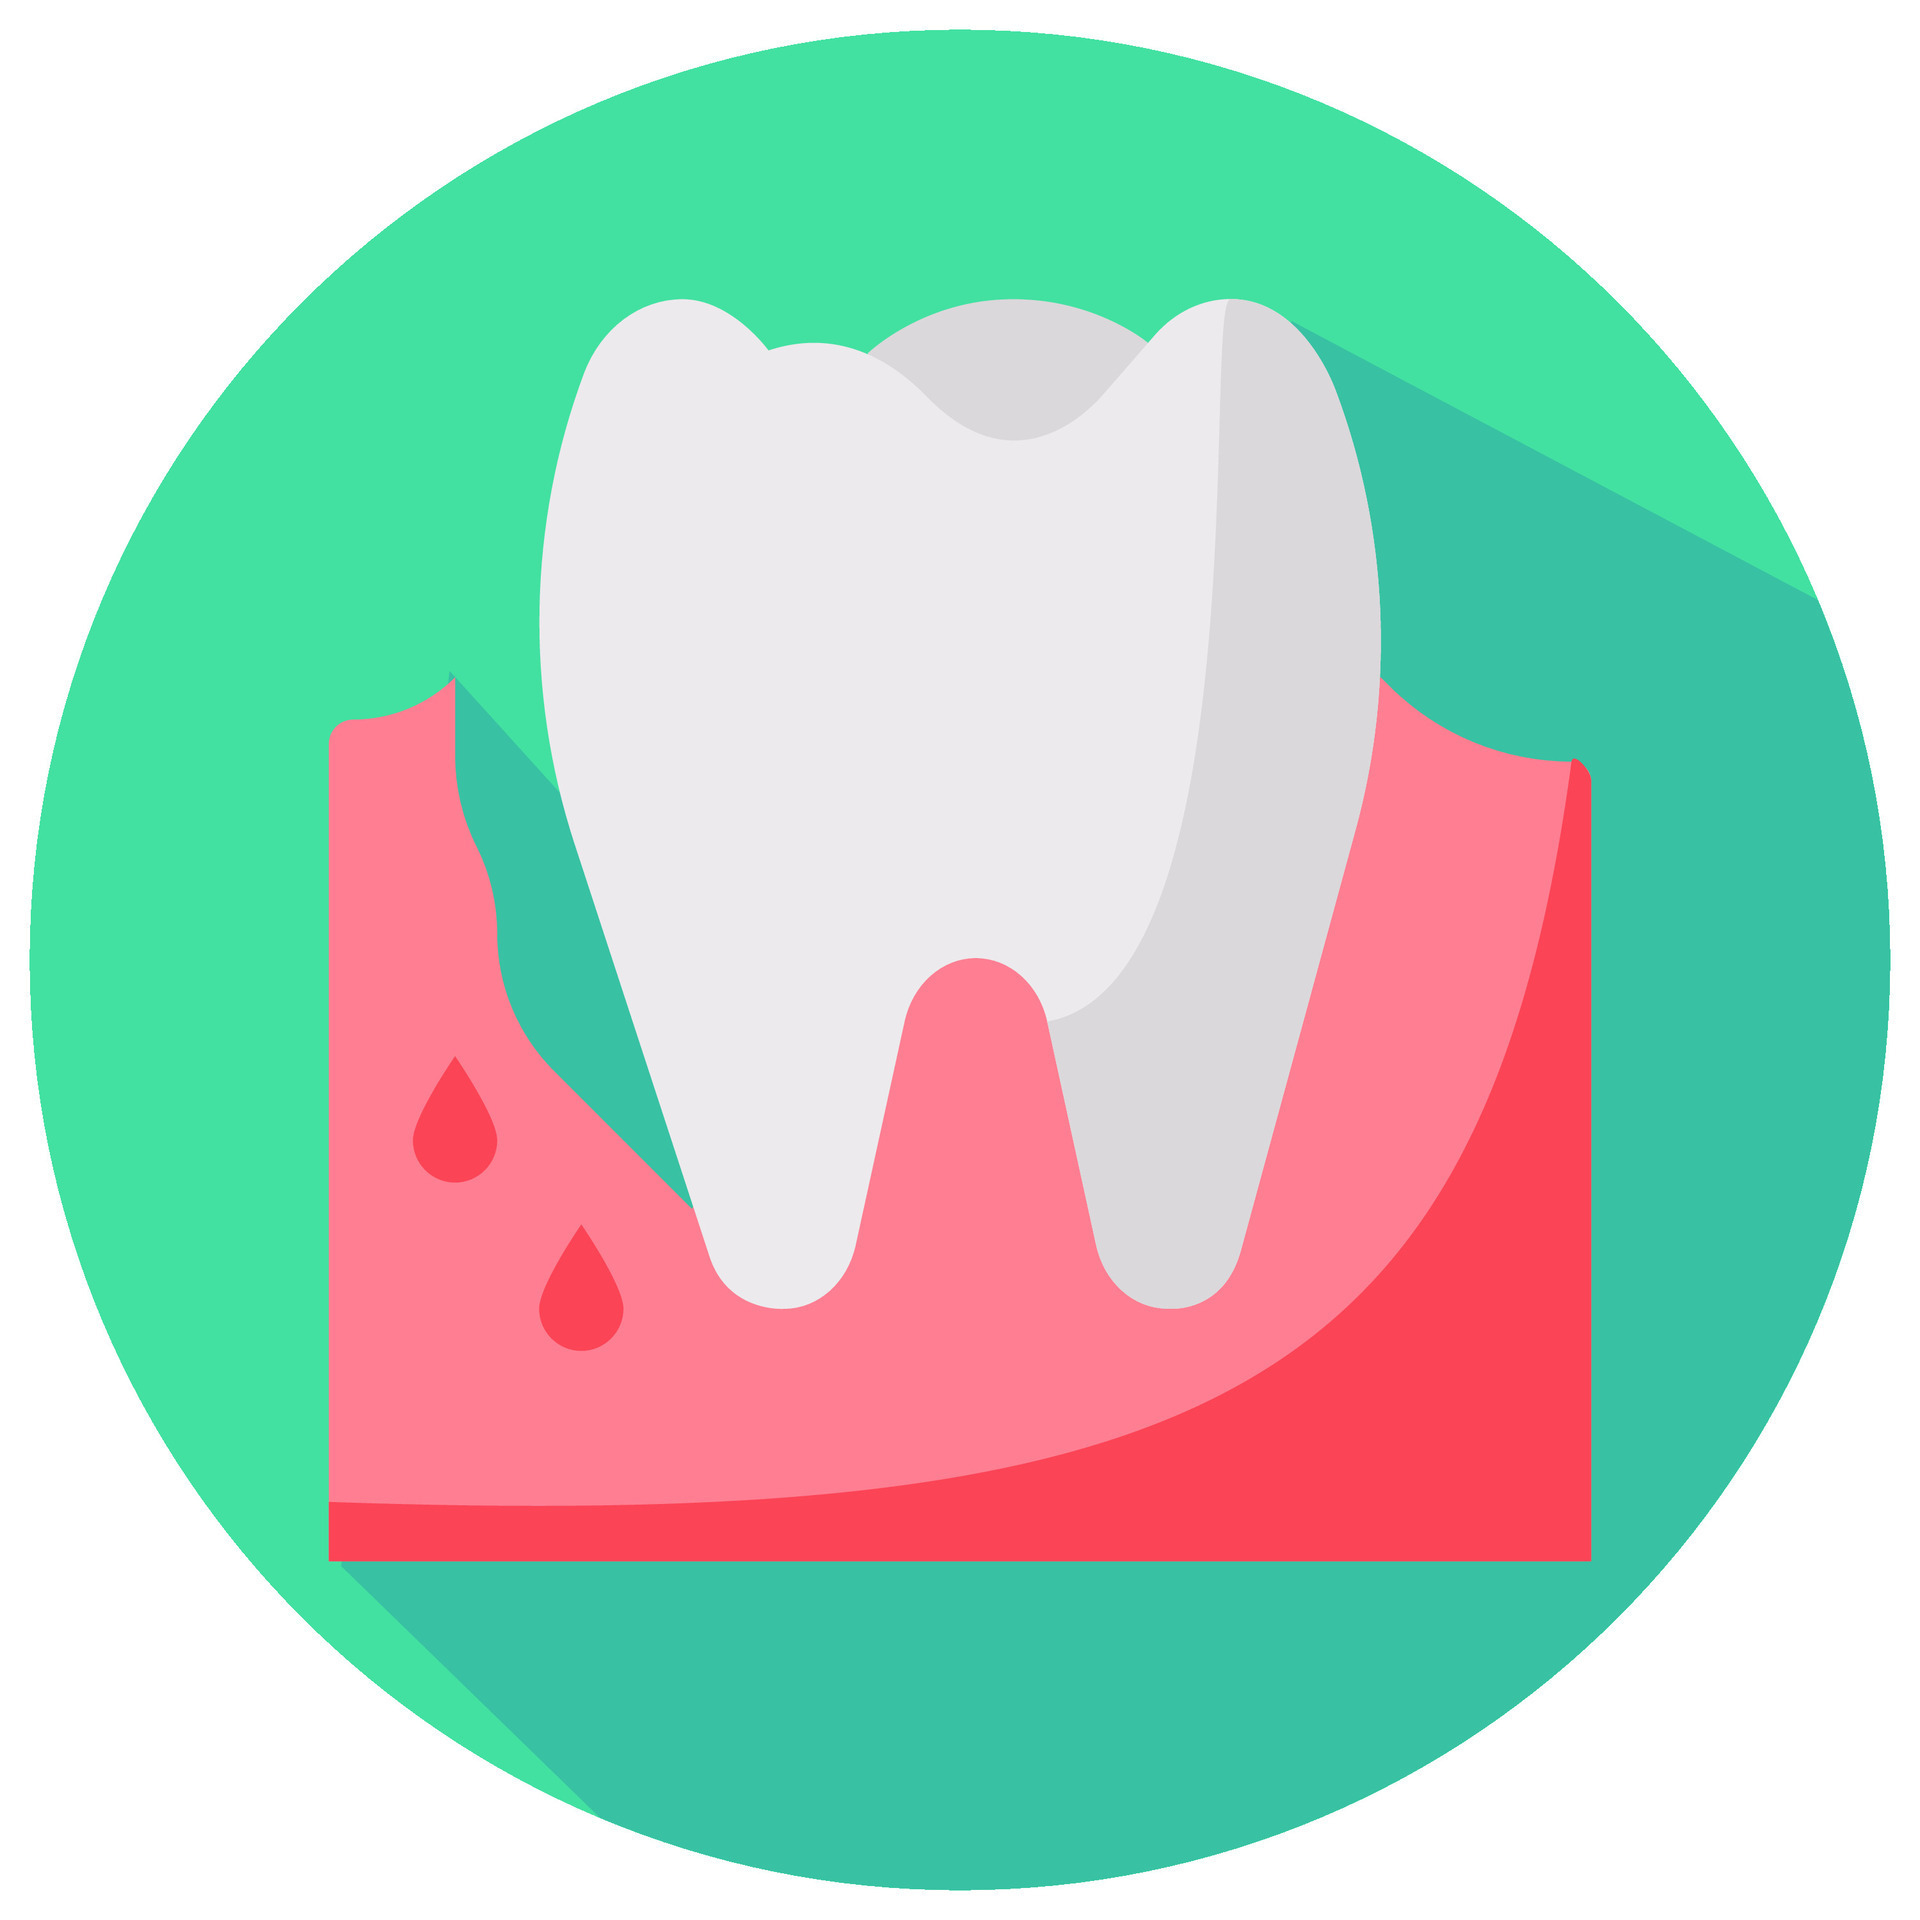 https://static.vecteezy.com/system/resources/previews/026/517/137/original/periodontitis-round-flat-icon-vector.jpg